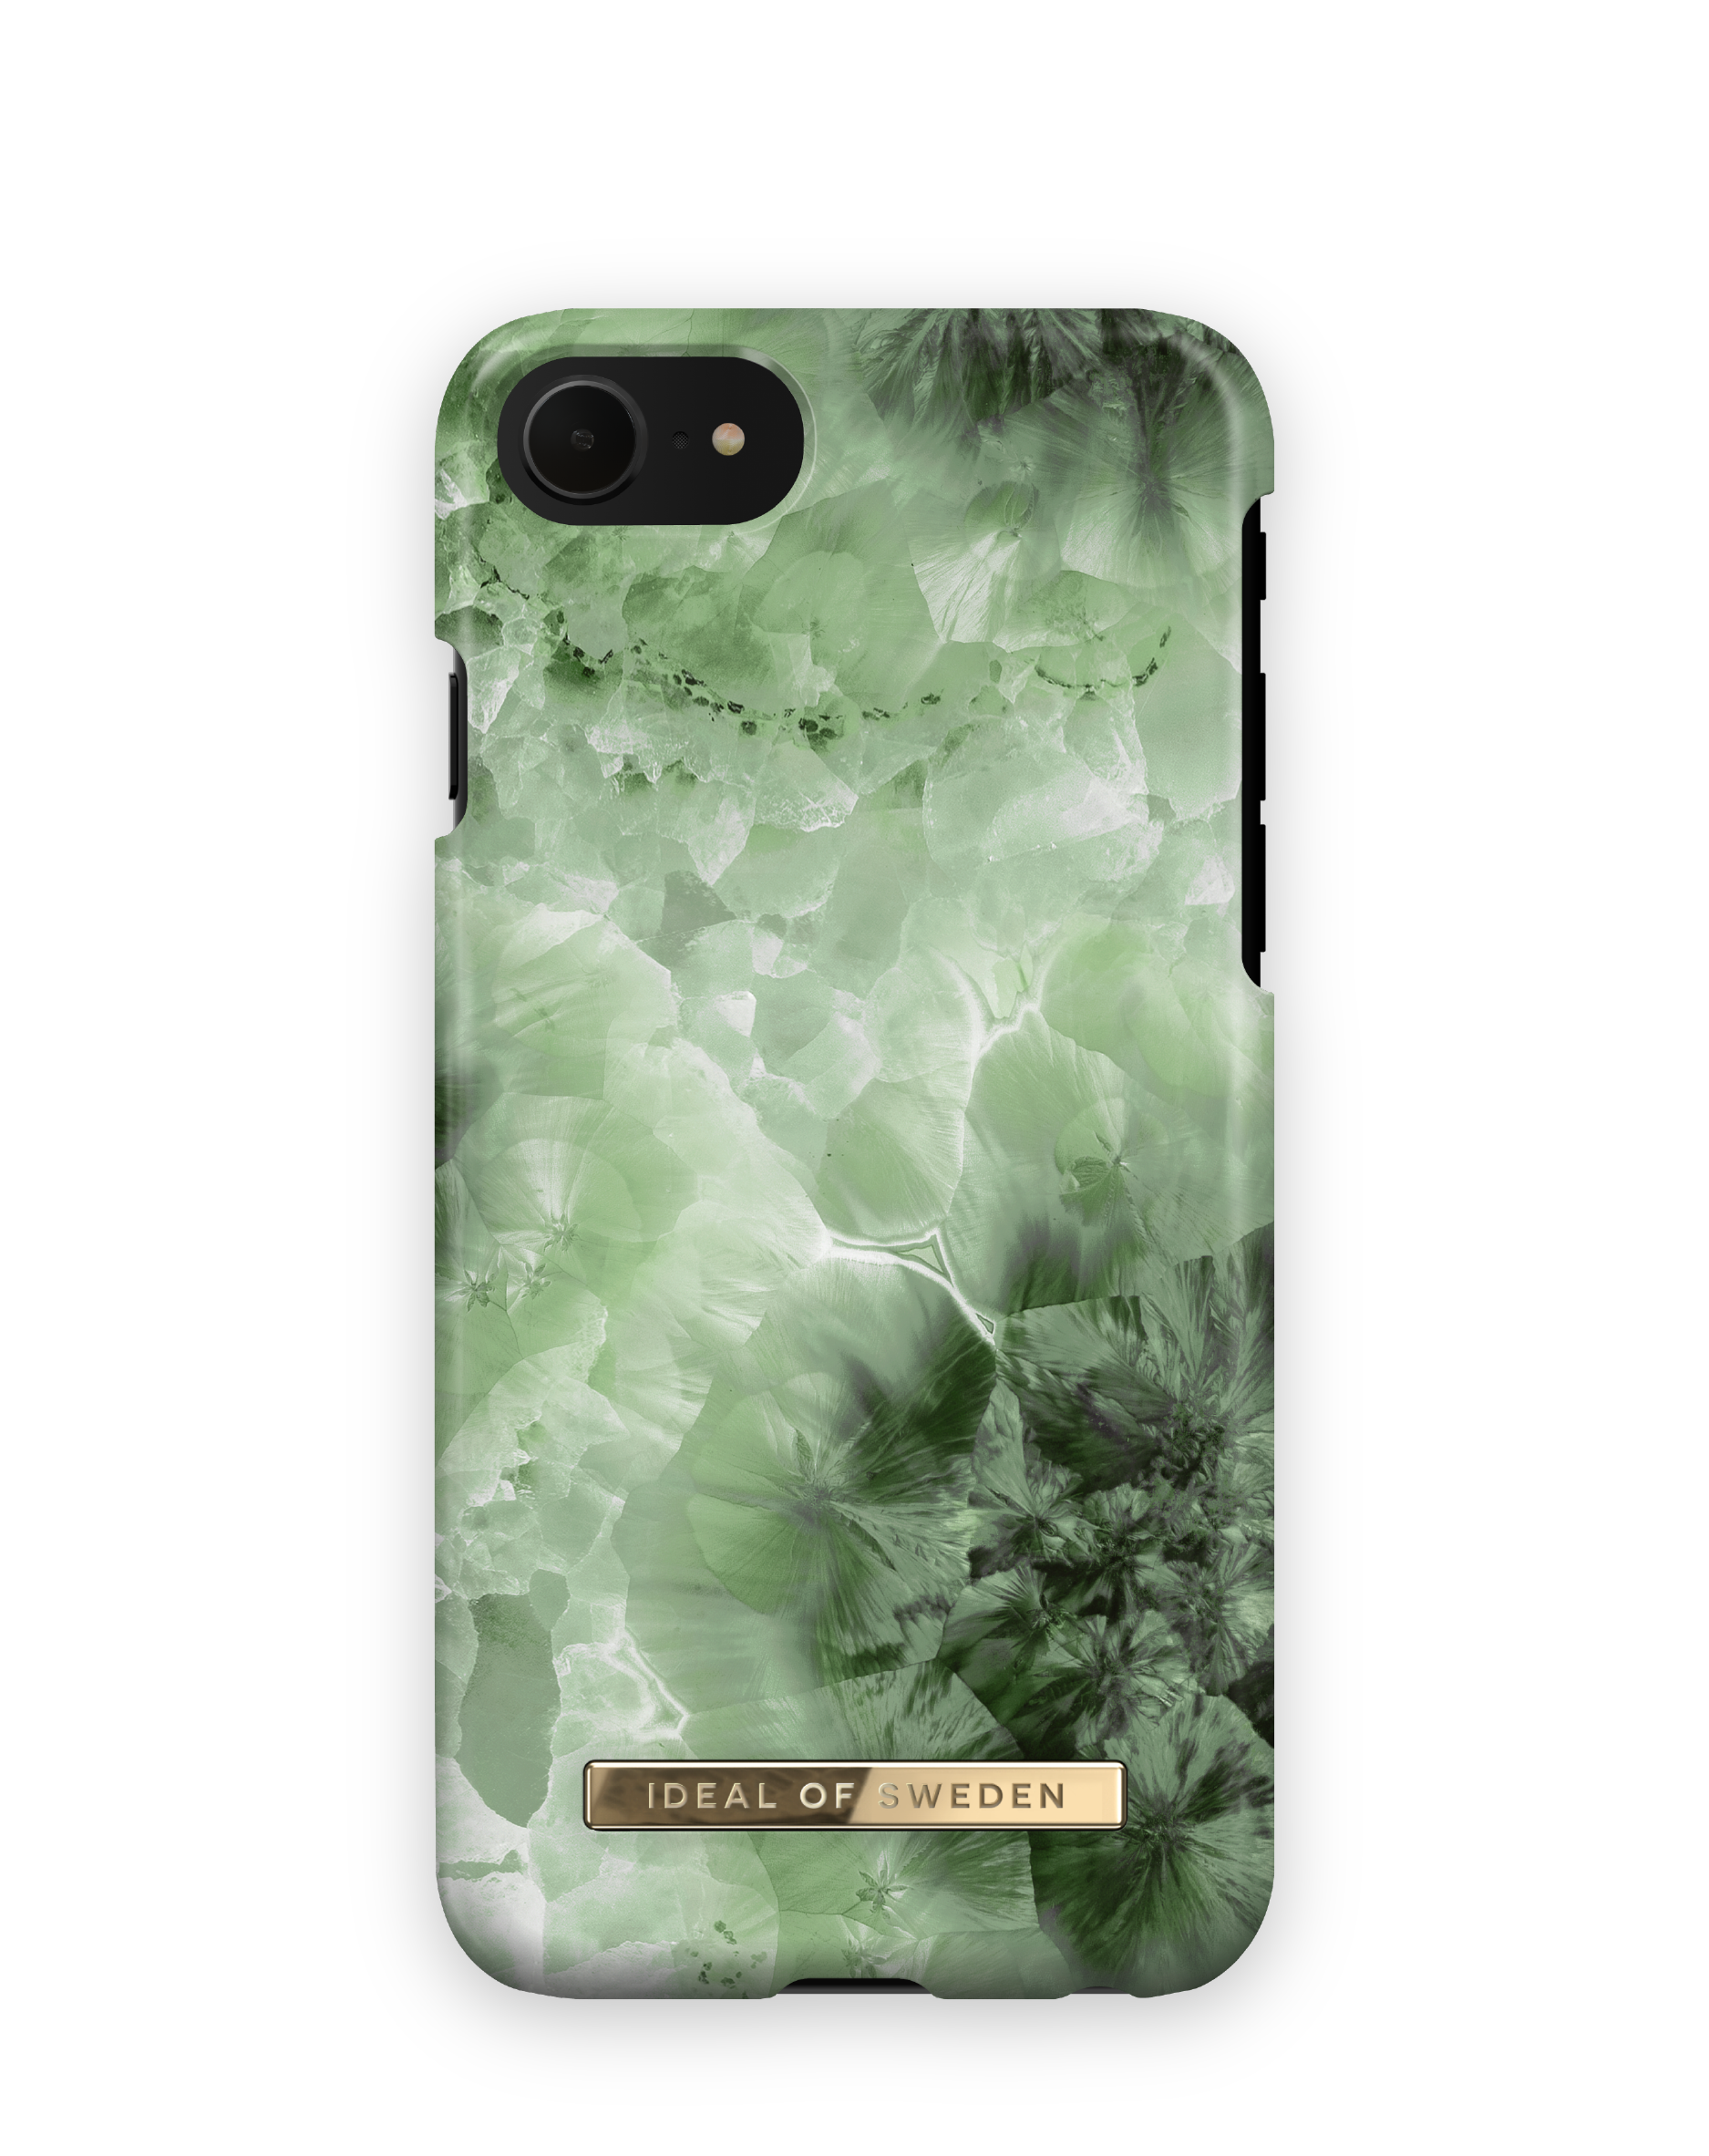 IDEAL OF SWEDEN iPhone SE 7, Apple, IDFCAW20-I7-230, iPhone iPhone Apple Crystal Backcover, Green Apple Apple 6(S), Sky iPhone Apple (2020), 8